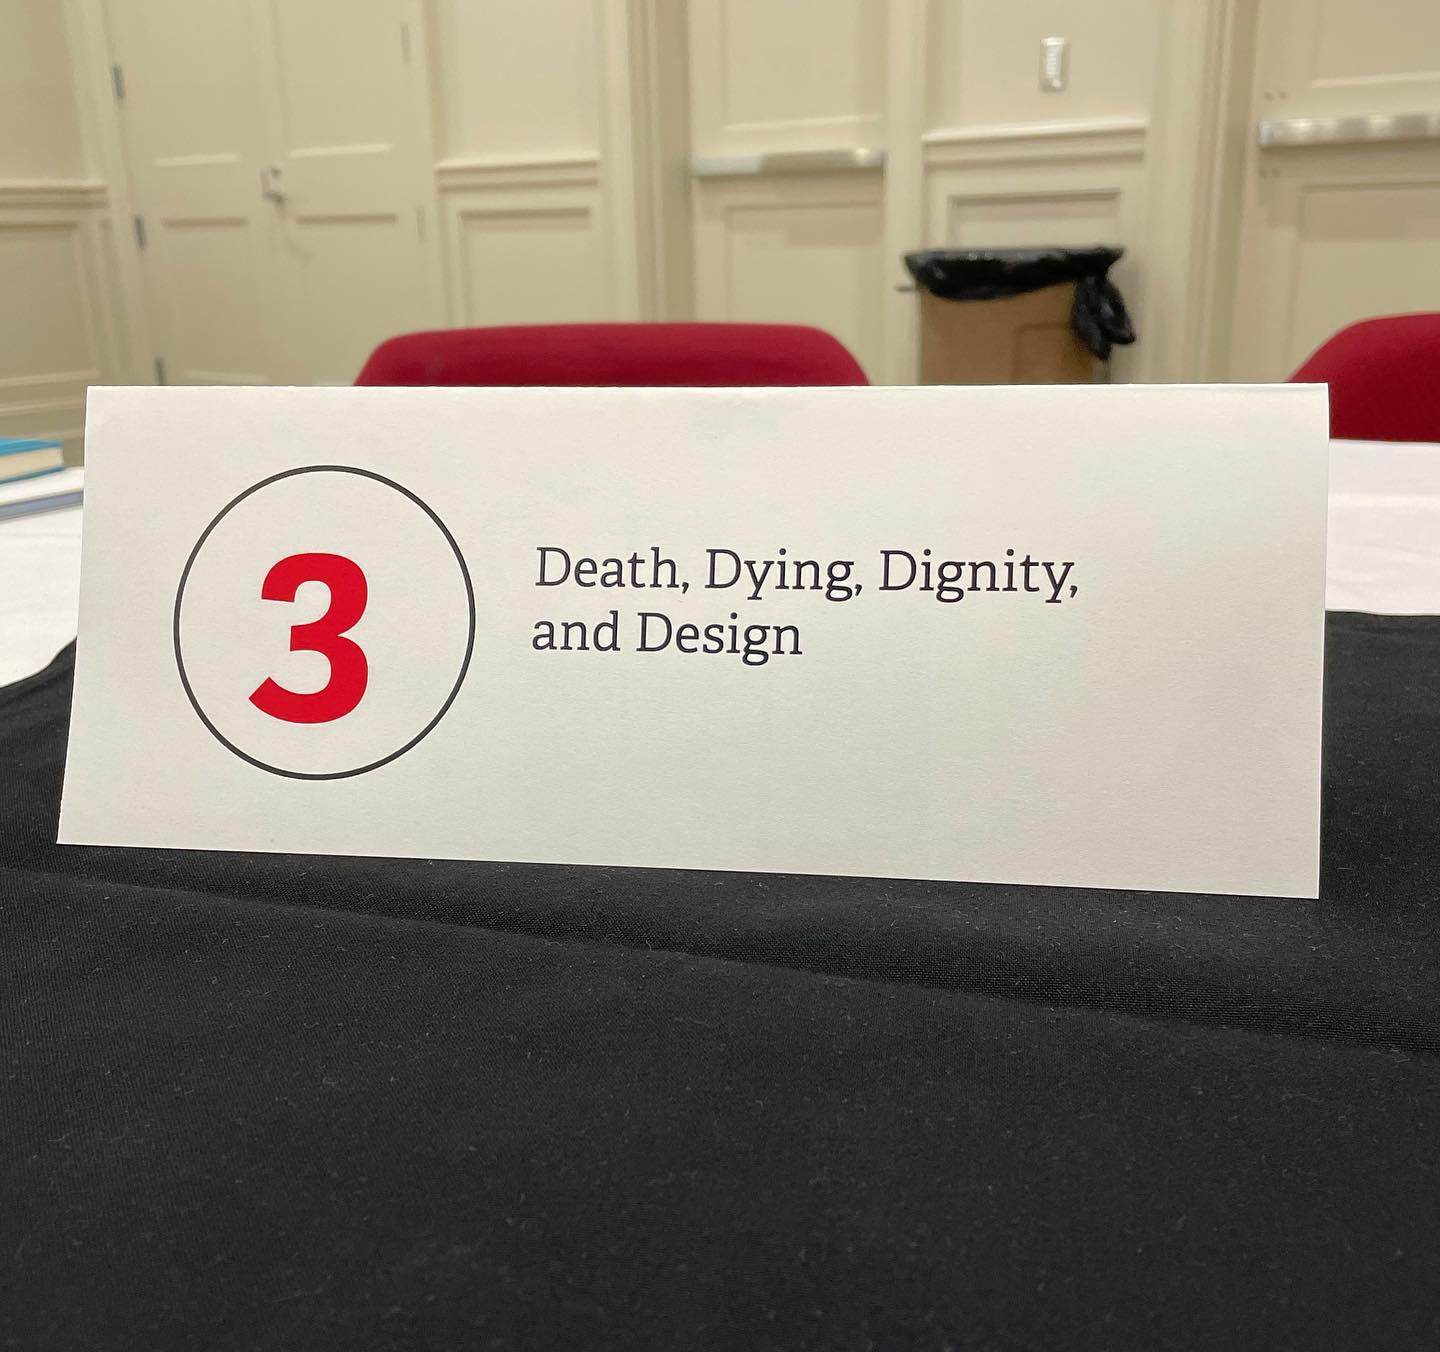 Let’s talk about death and design! I’m hosting a table about our work our groups are doing through @scrippsaging. @miamiuniversity